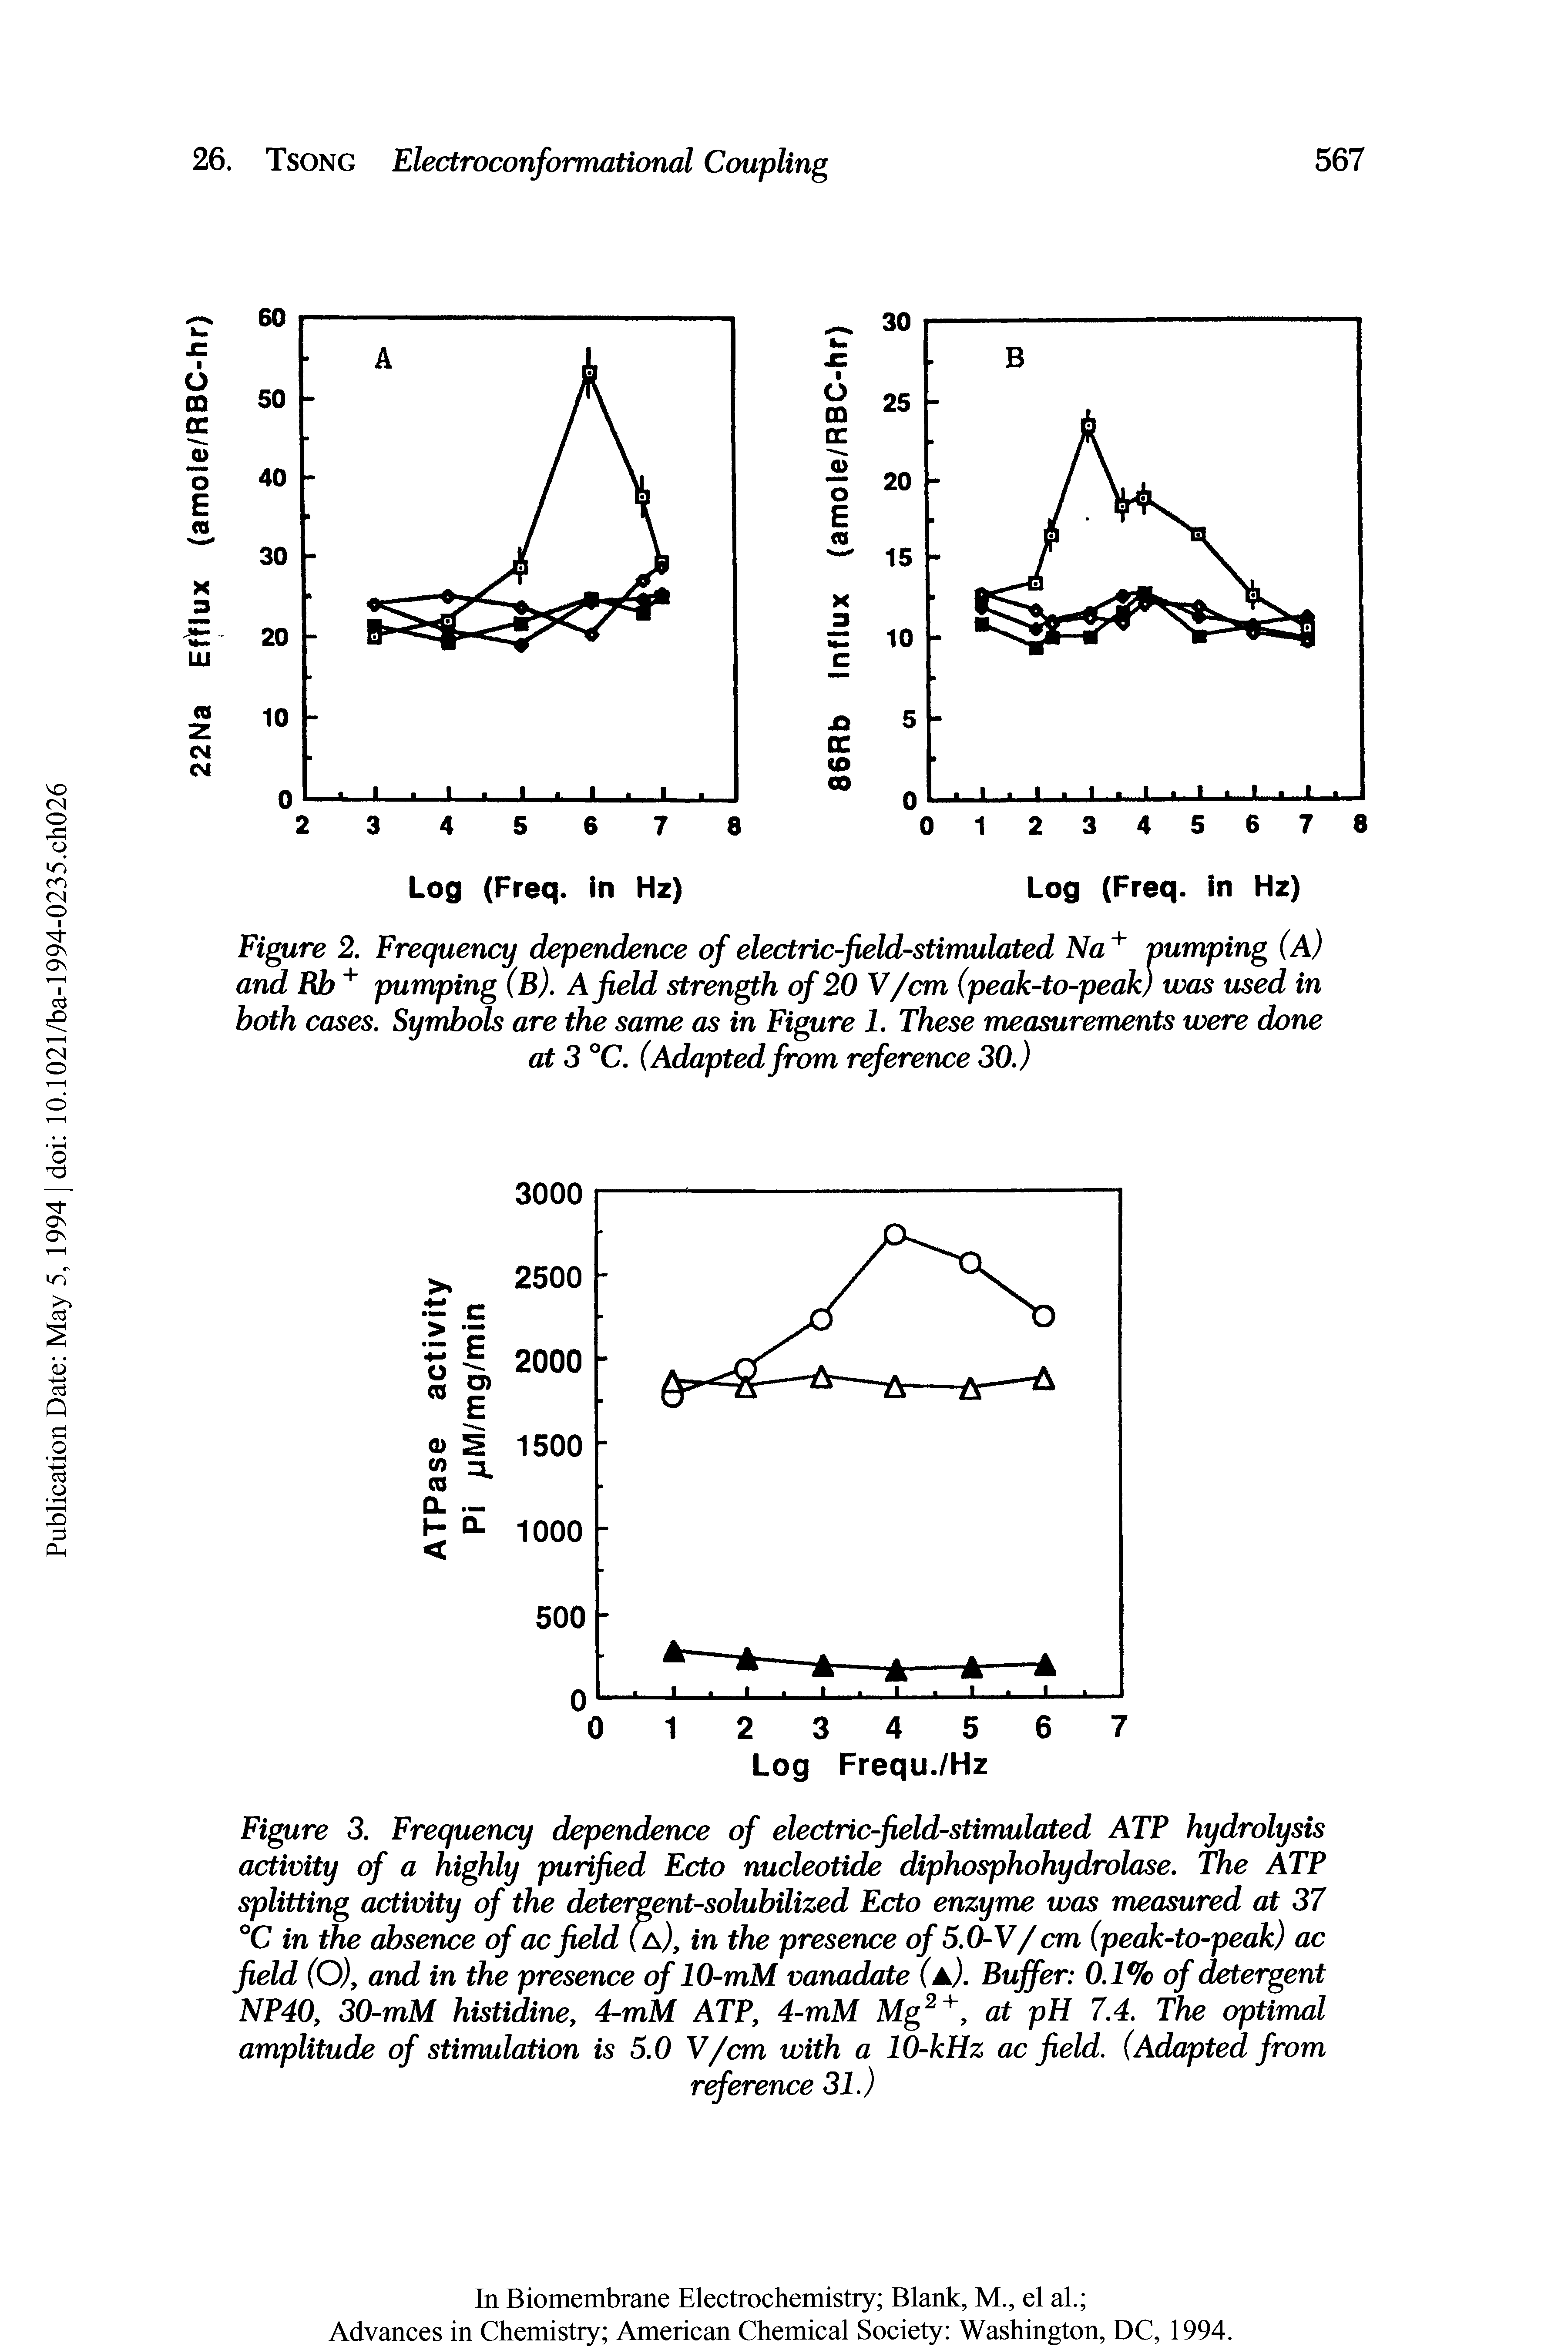 Figure 3. Frequency dependence of electric-field-stimulated ATP hydrolysis activity of a highly purified Ecto nucleotide diphosphohydrolase. The ATP splitting activity of the detergent-solubilized Ecto enzyme was measured at 37 °C in the absence of acfield (a,), in the presence of 5.0-V/cm (peak-to-peak) ac field (O), and in the presence of 10-mM vanadate (a). Buffer 0.1% of detergent NP40, 30-mM histidine, 4-mM ATP, 4-rnM Mg2+, at pH 7.4. The optimal amplitude of stimulation is 5.0 V/cm with a 10-kHz ac field. (Adapted from...